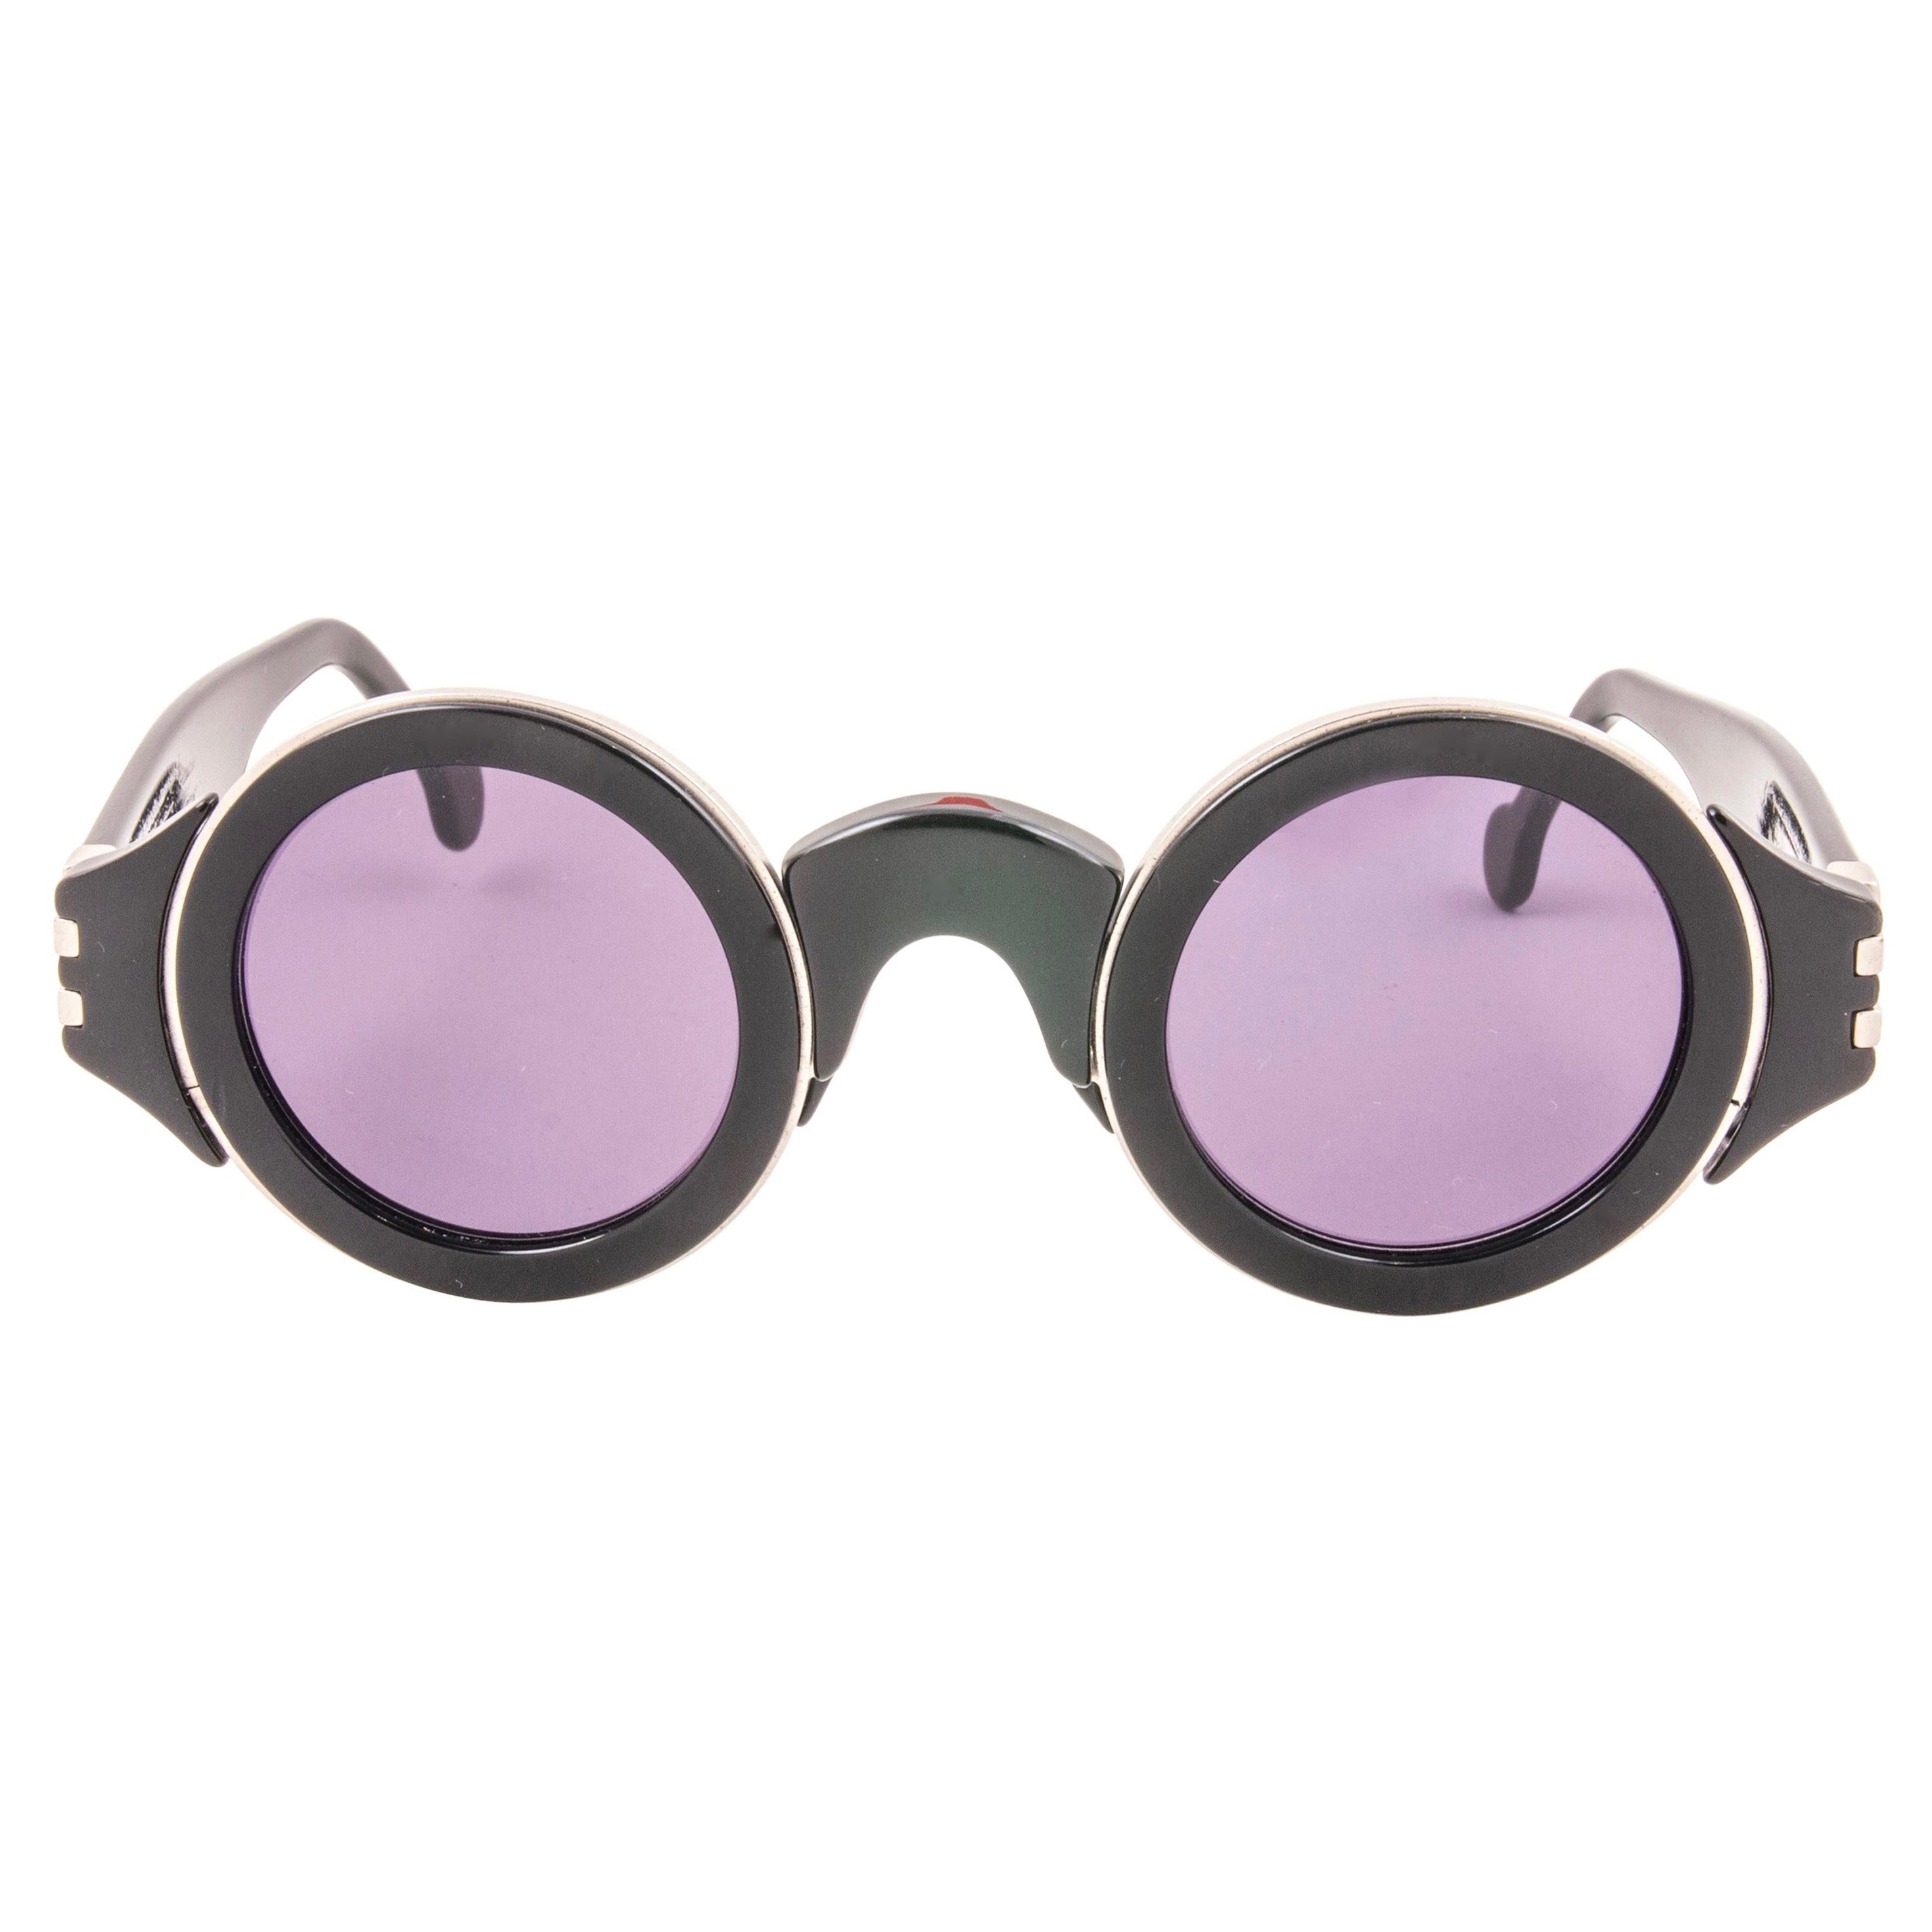 Karl Lagerfeld Vintage Round Black and Silver Sunglasses Made In Germany, 1980s For Sale